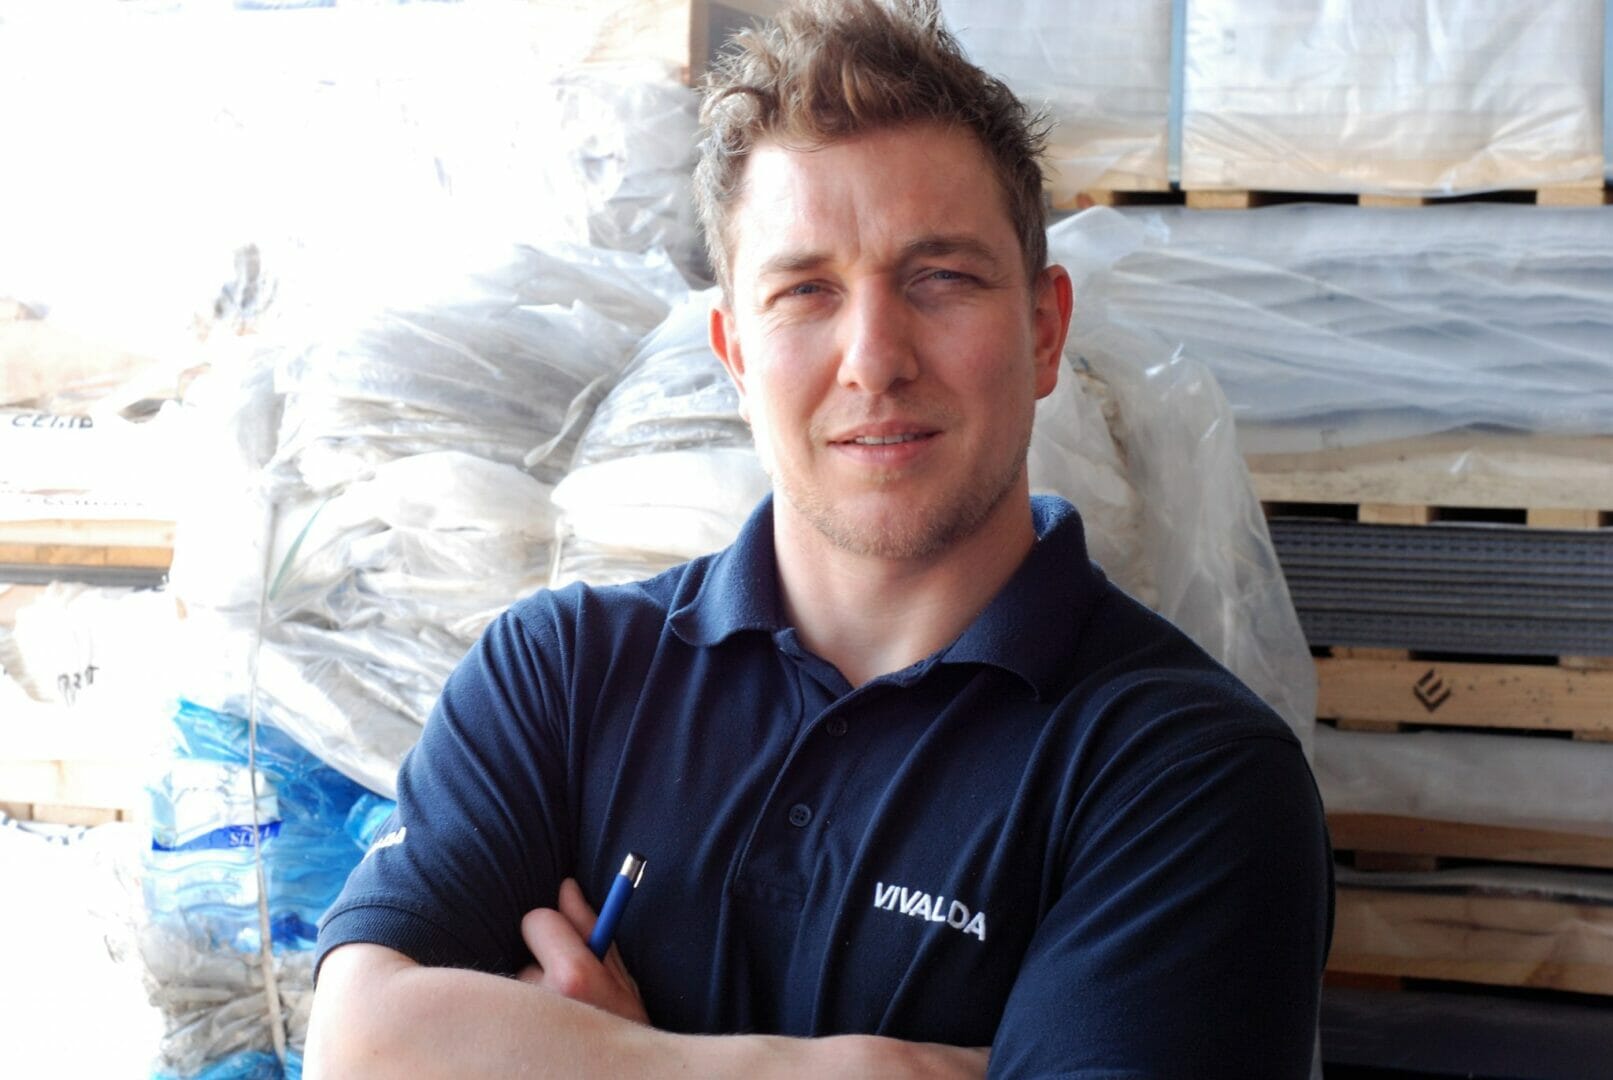 VIVALDA CUTS RECYCLING COSTS BY THREE QUARTERS @VivaldaLimited